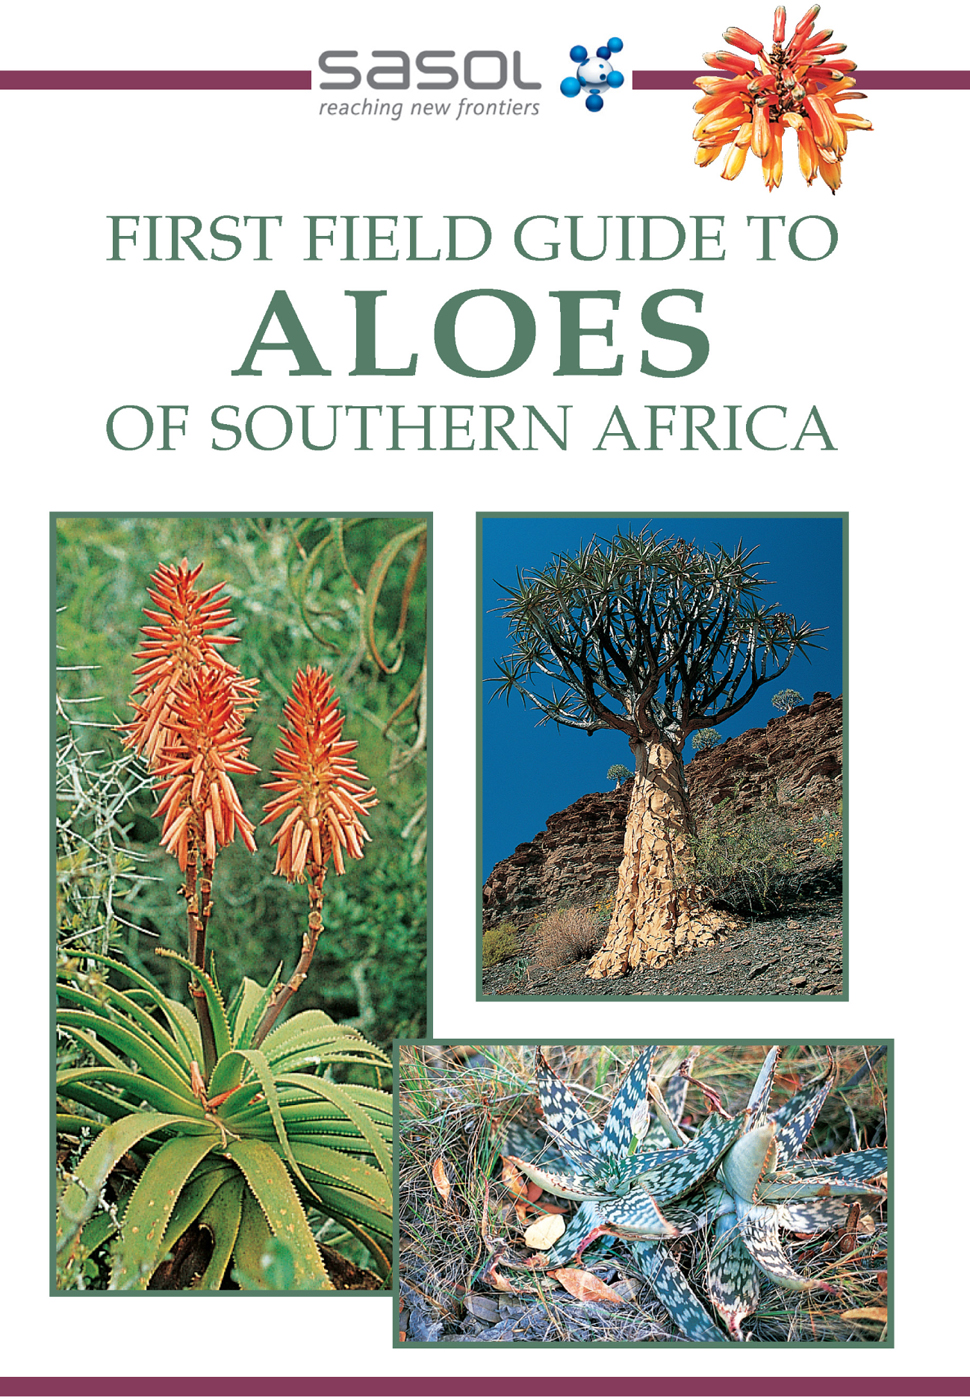 FIRST FIELD GUIDE TO ALOES OF SOUTHERN AFRICA GIDEON SMITH Contents - photo 1